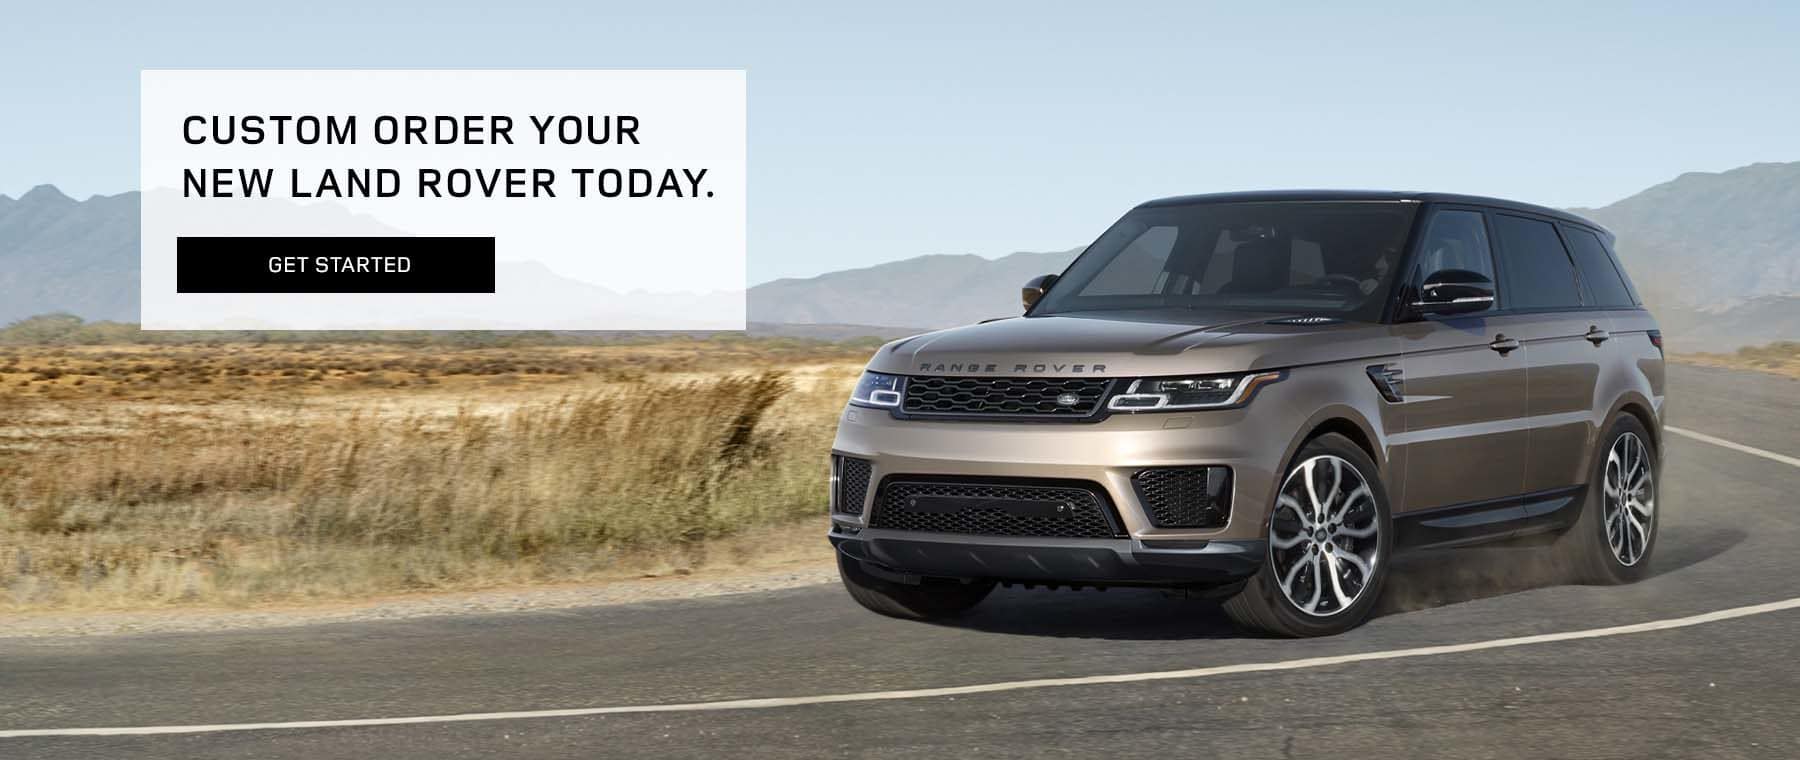 CUSTOM ORDER YOUR NEW LAND ROVER TODAY.